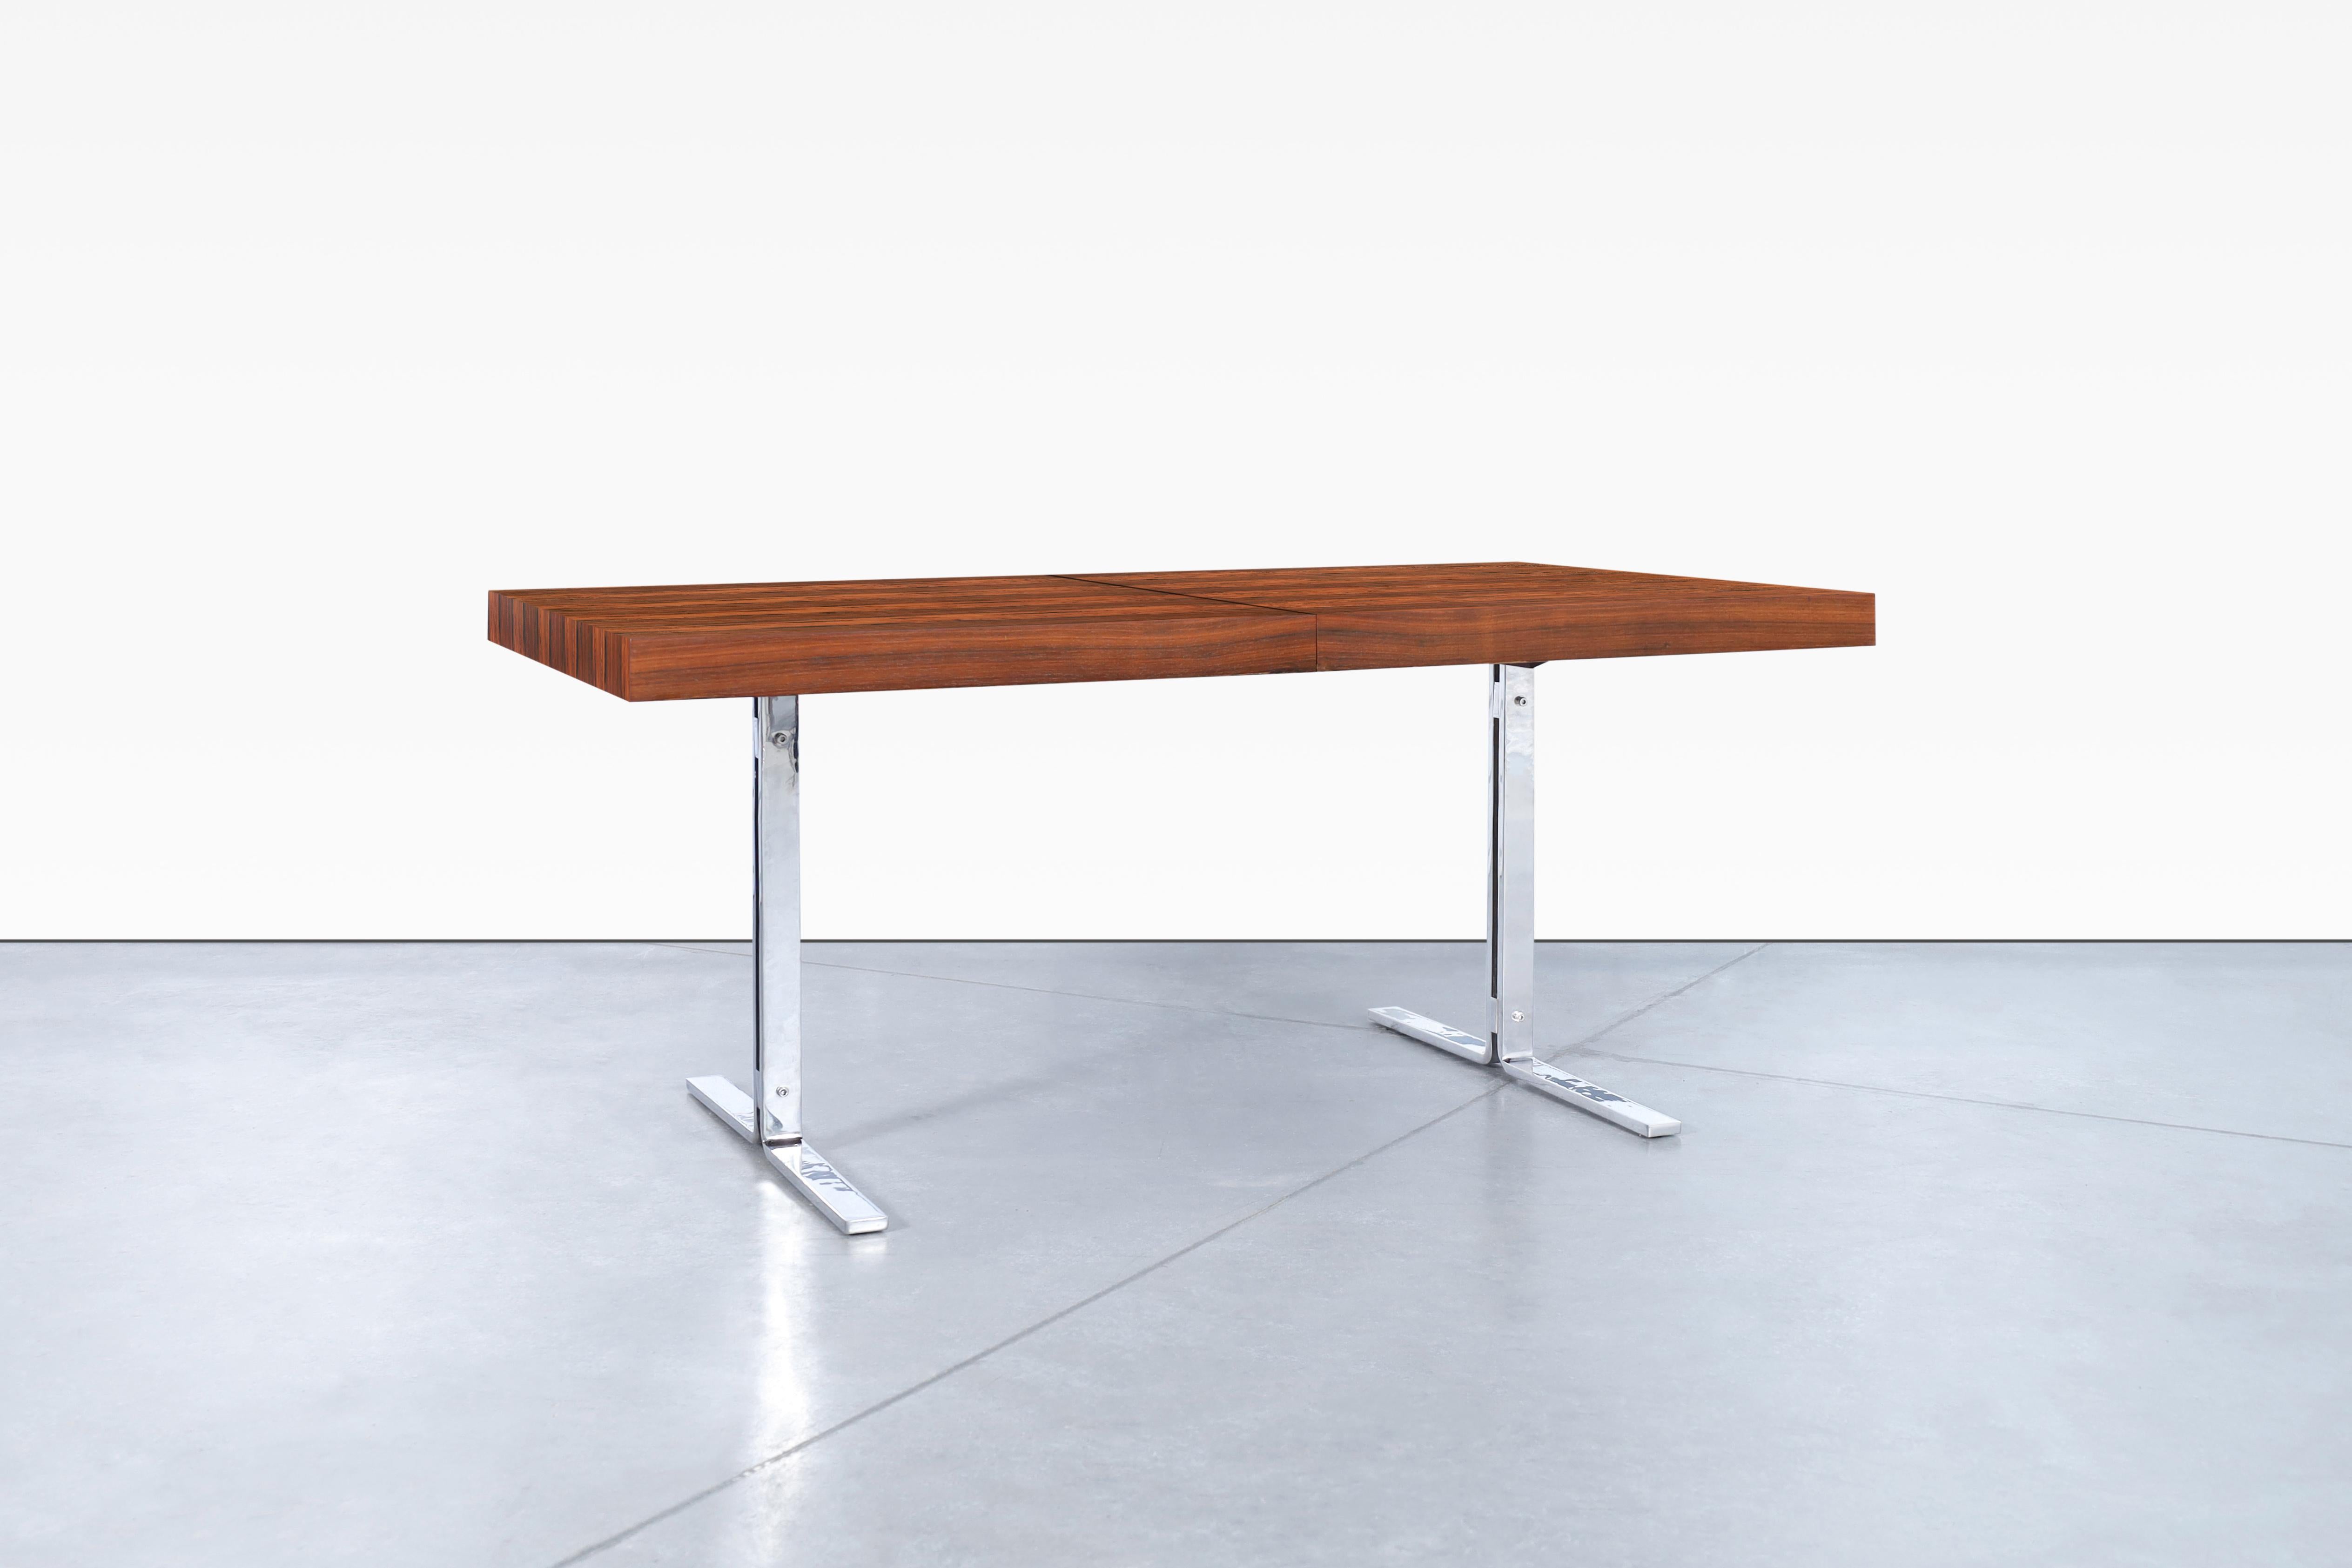 Gorgeous Danish modern rosewood dining table by Poul Nørreklit for Georg Petersens, made in Denmark, circa 1960’s. This crafted table has been built with an avant-garde design, is made up of the highest quality Brazilian rosewood, and stands out for